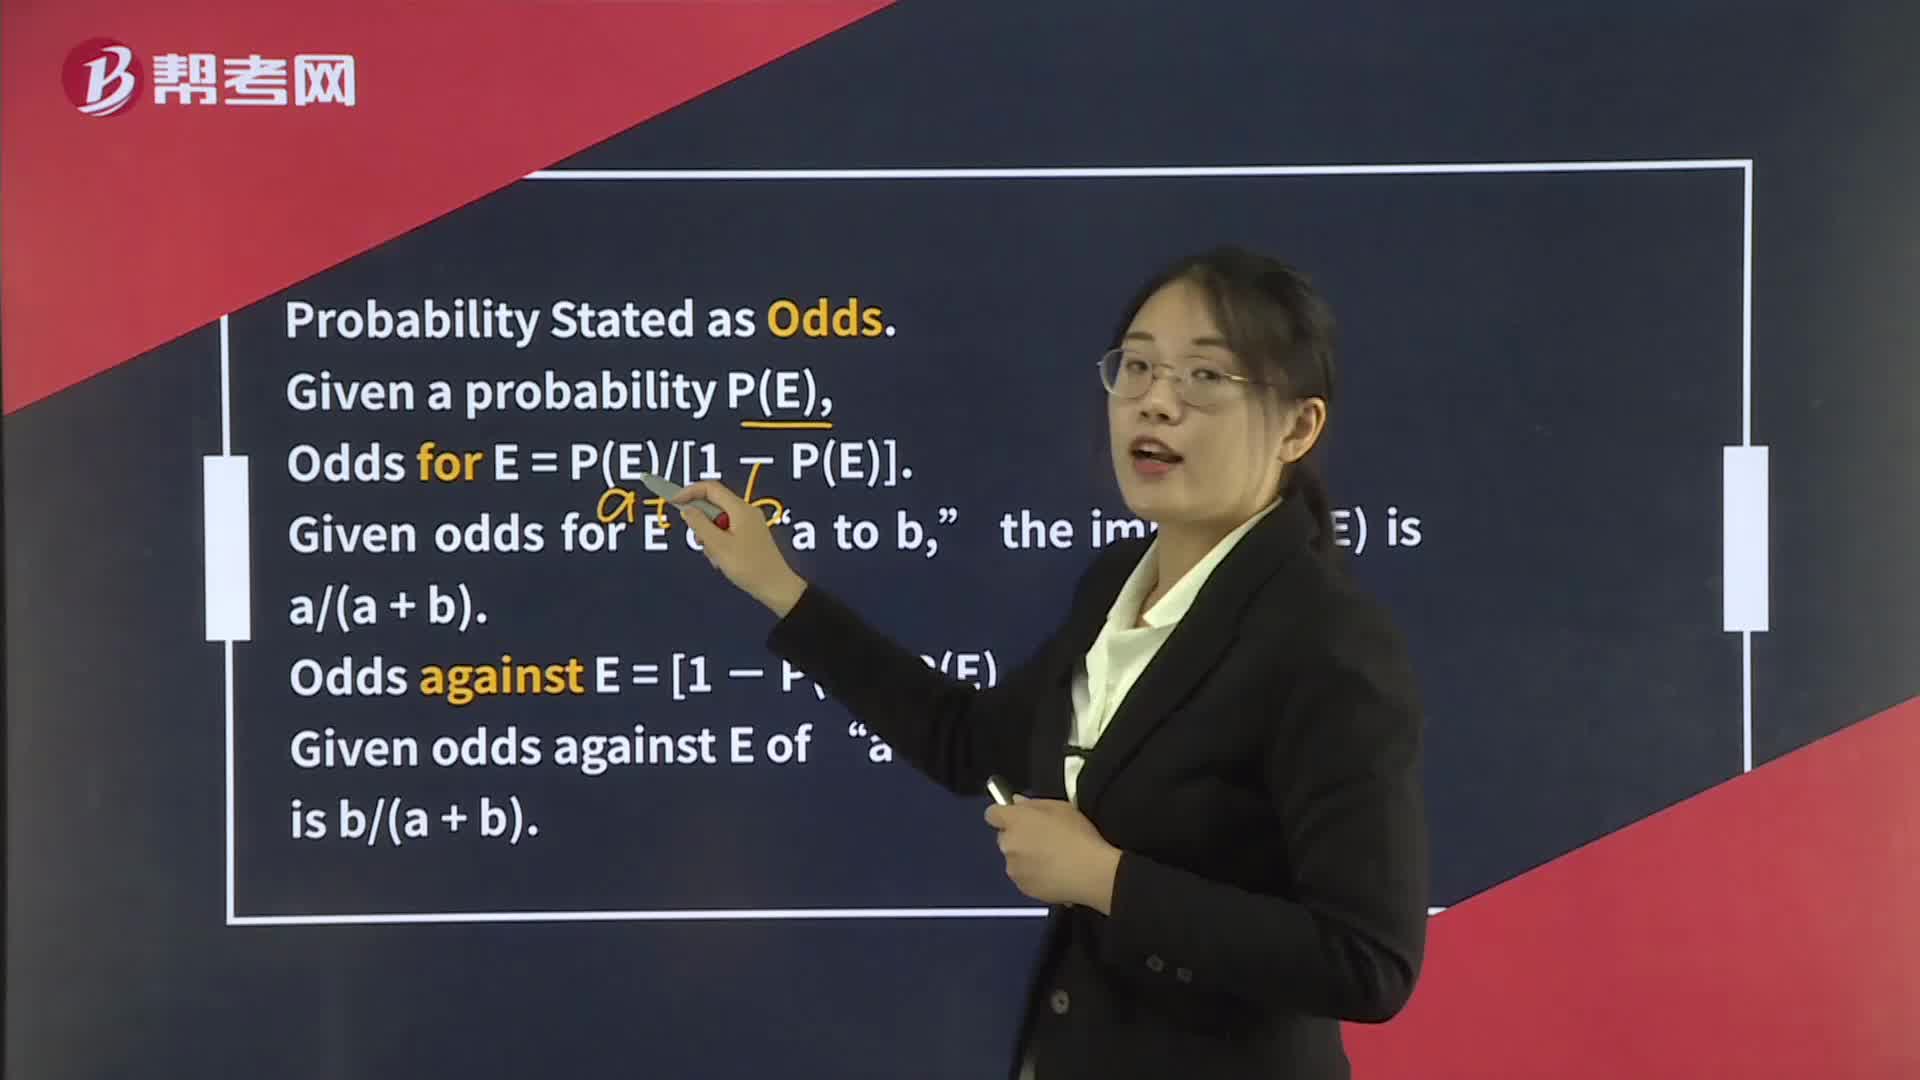 Probability Stated as Odds